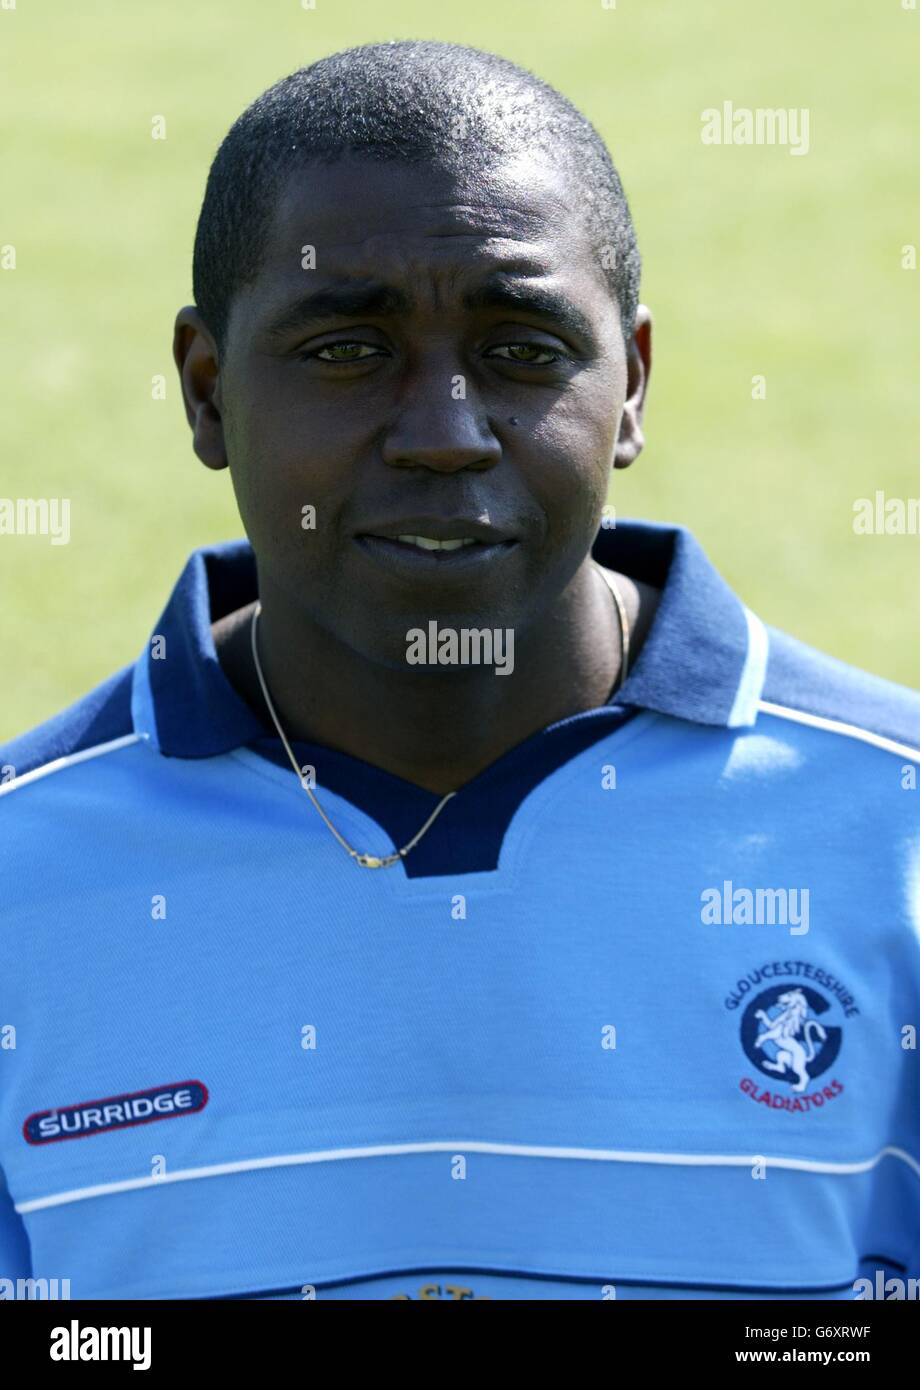 Mark Alleyne of Gloucestershire County Cricket Club during a photocall at Bristol, ahead of the new 2004 season. Stock Photo